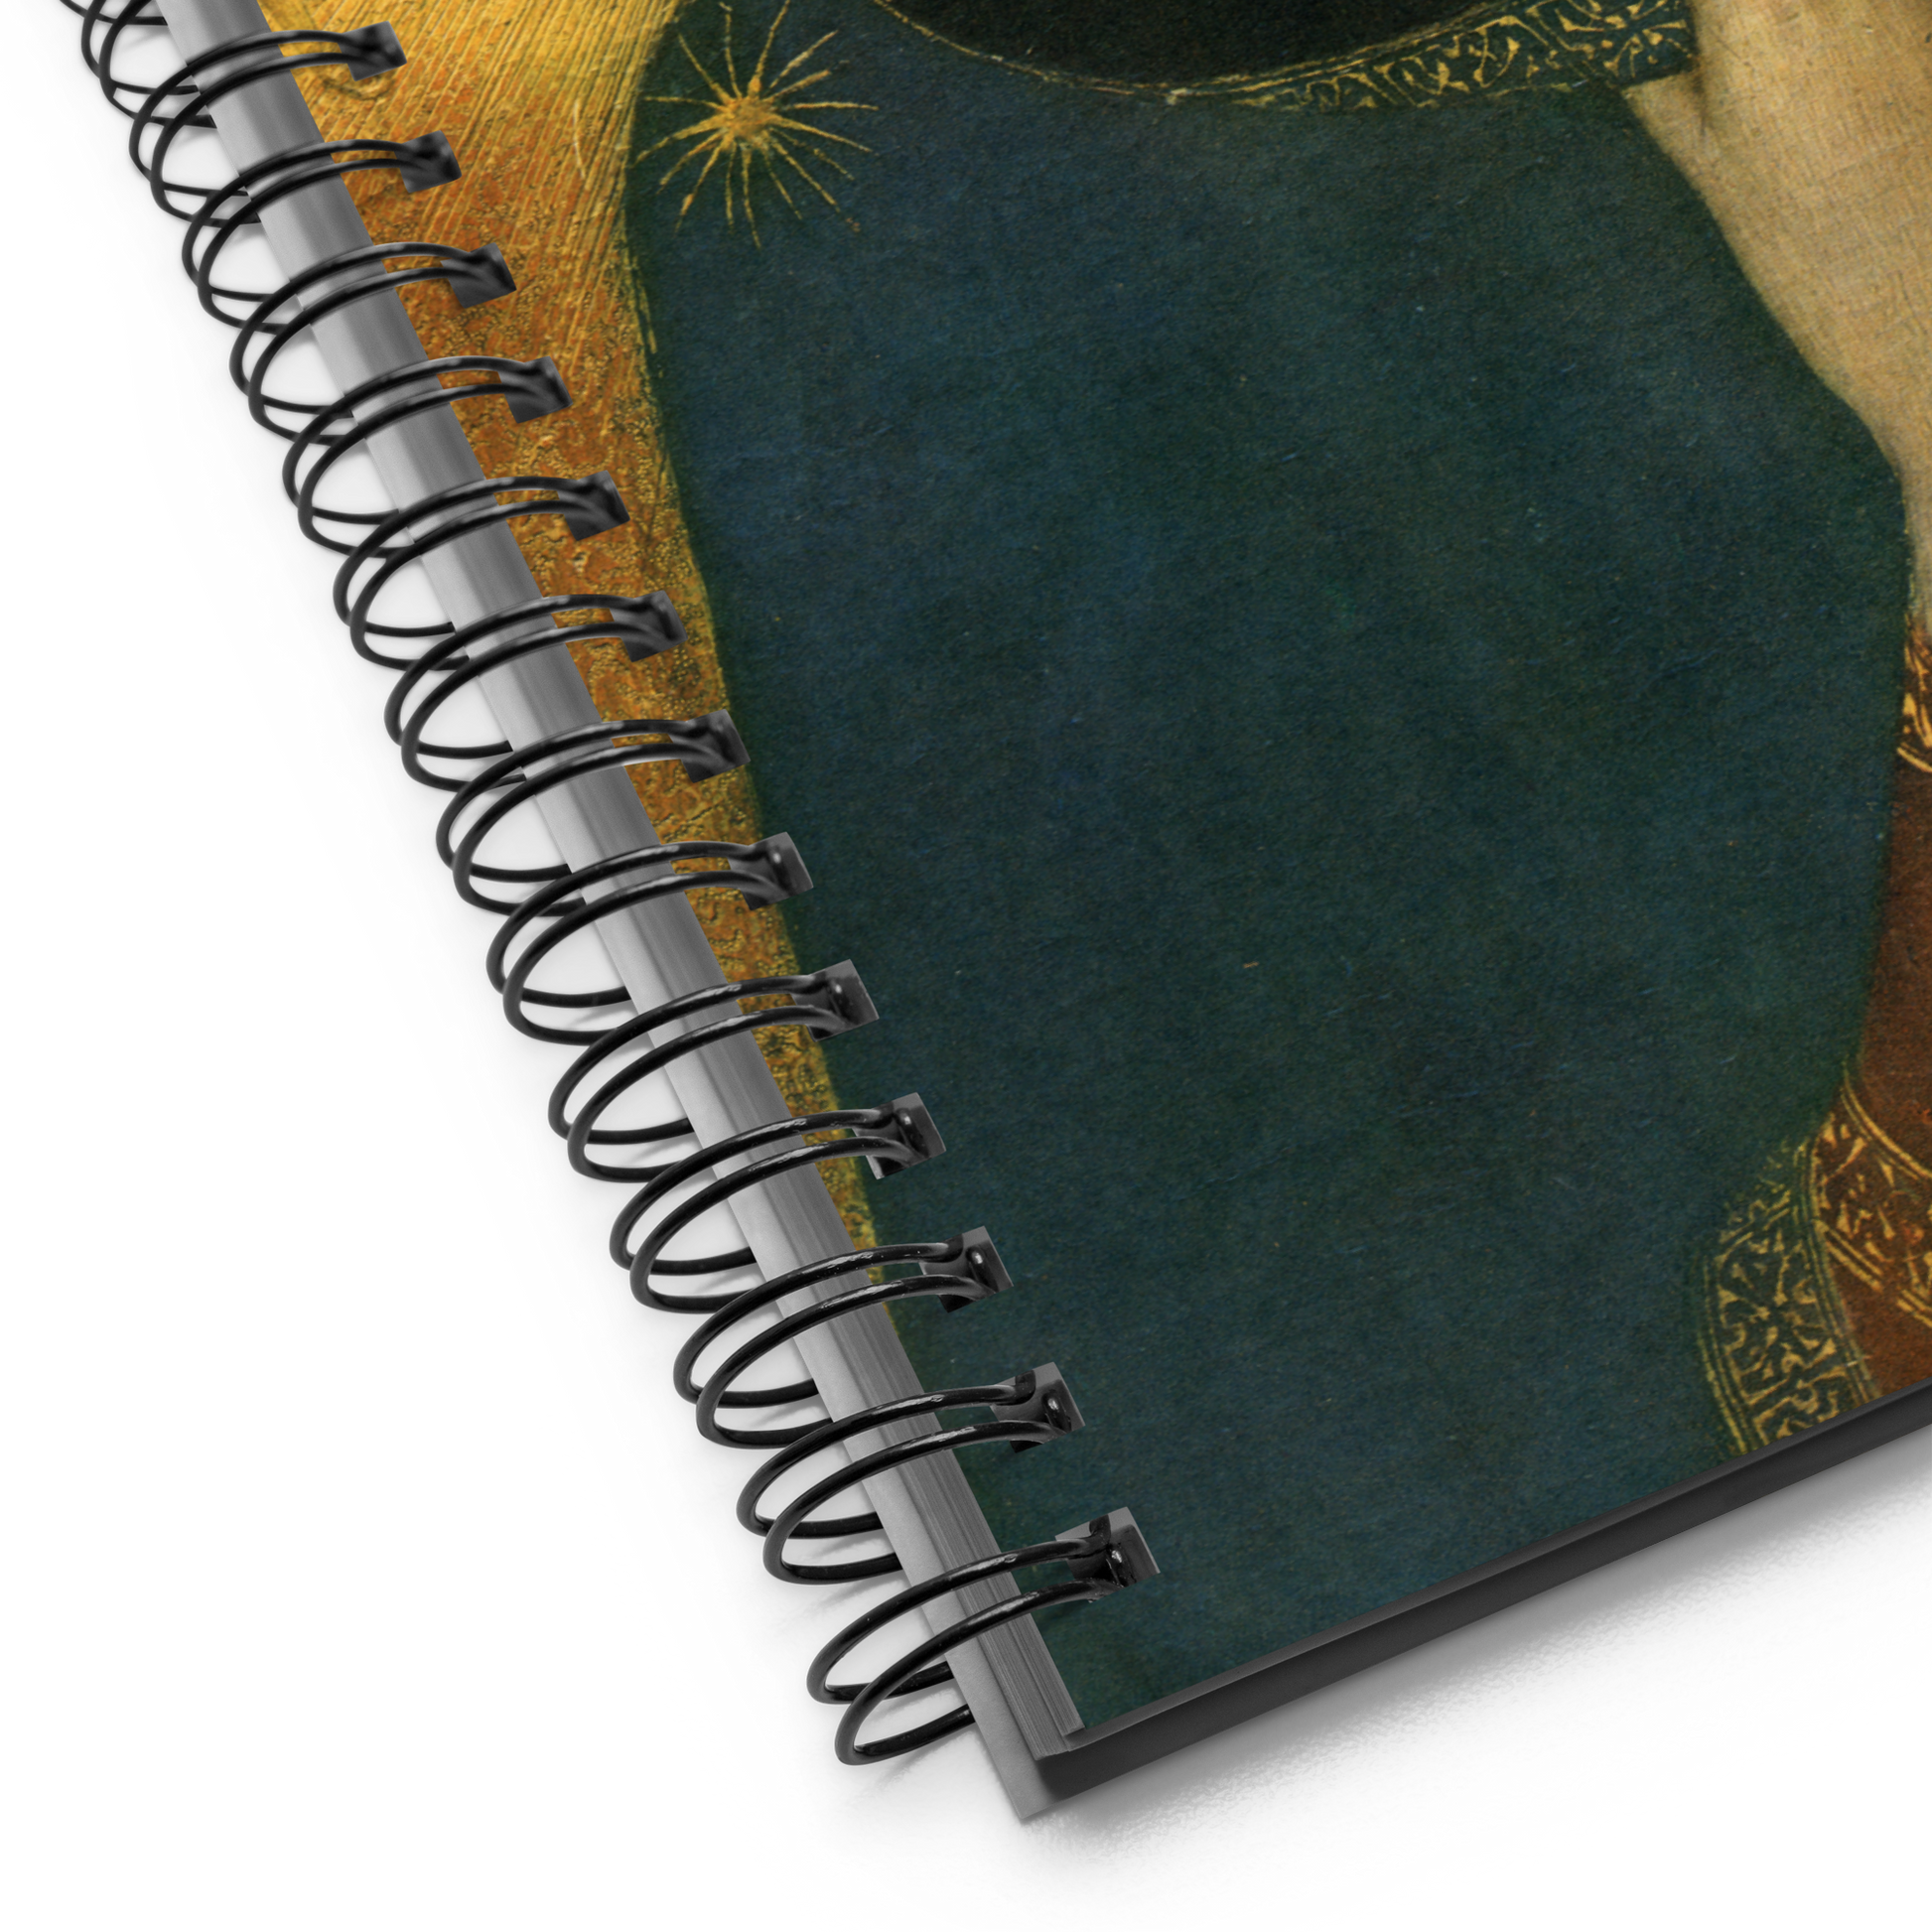 Annunciation of the Virgin Mary Spiral Notebook - Sanctus Art Gallery